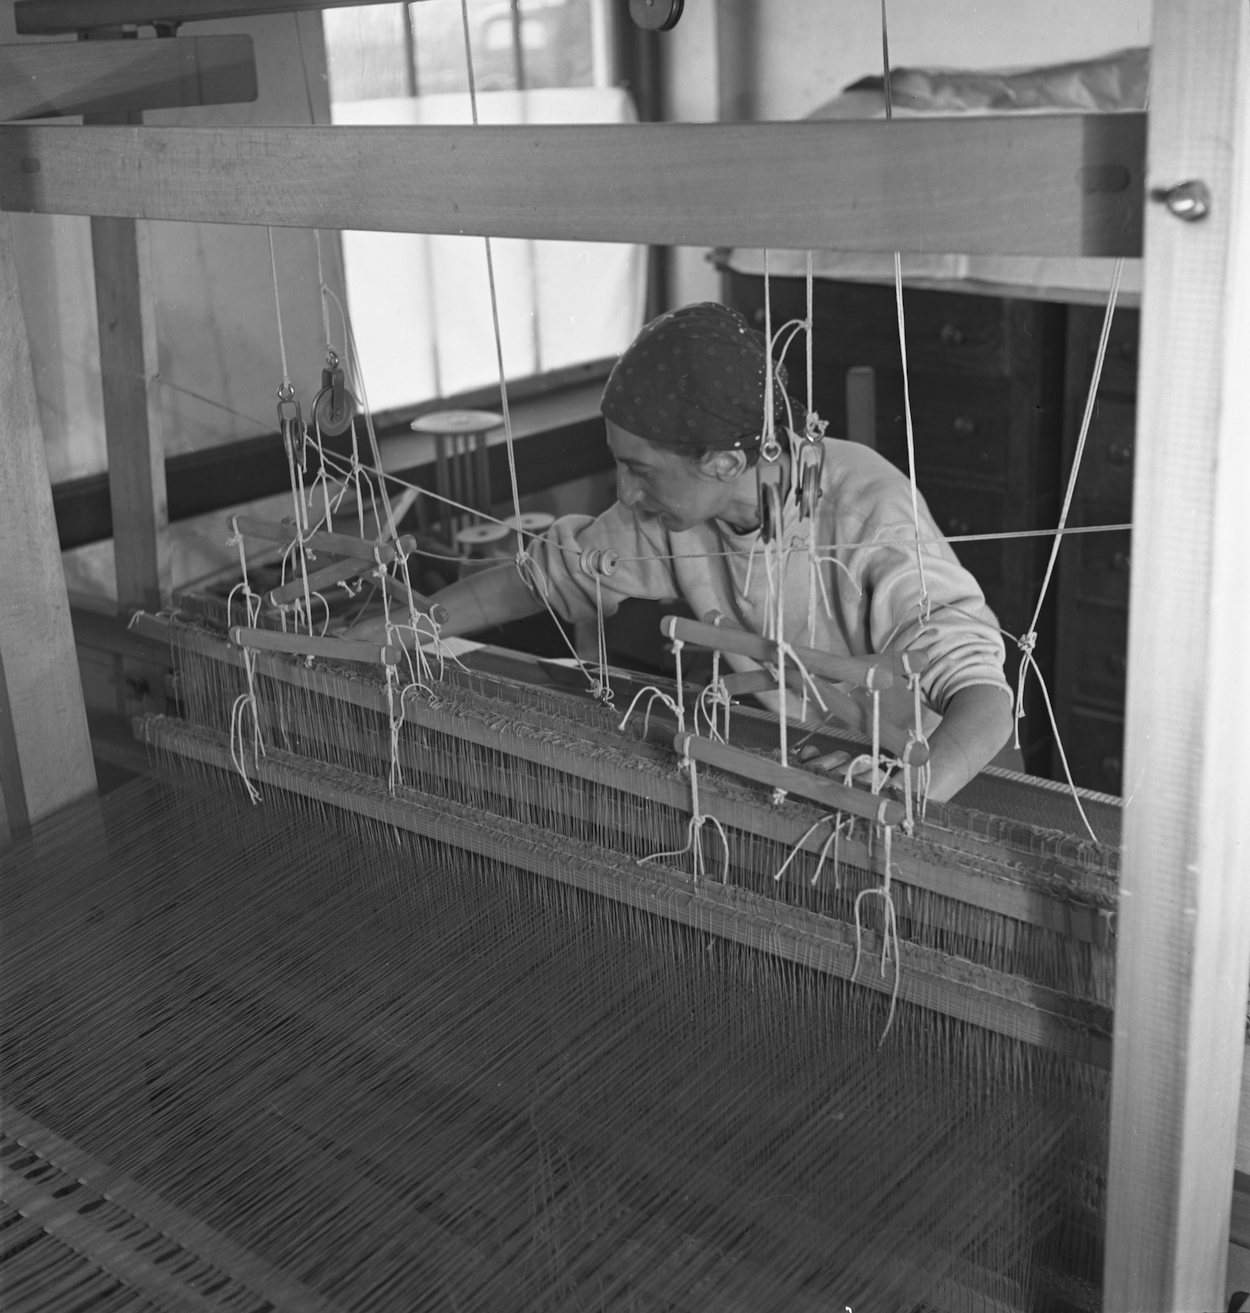 Anni Albers, Black Mountain College, 1937 (Western Regional Archives, State Archives of North Carolina; photo: Helen M. Post) © 2021 The Josef and Anni Albers Foundation